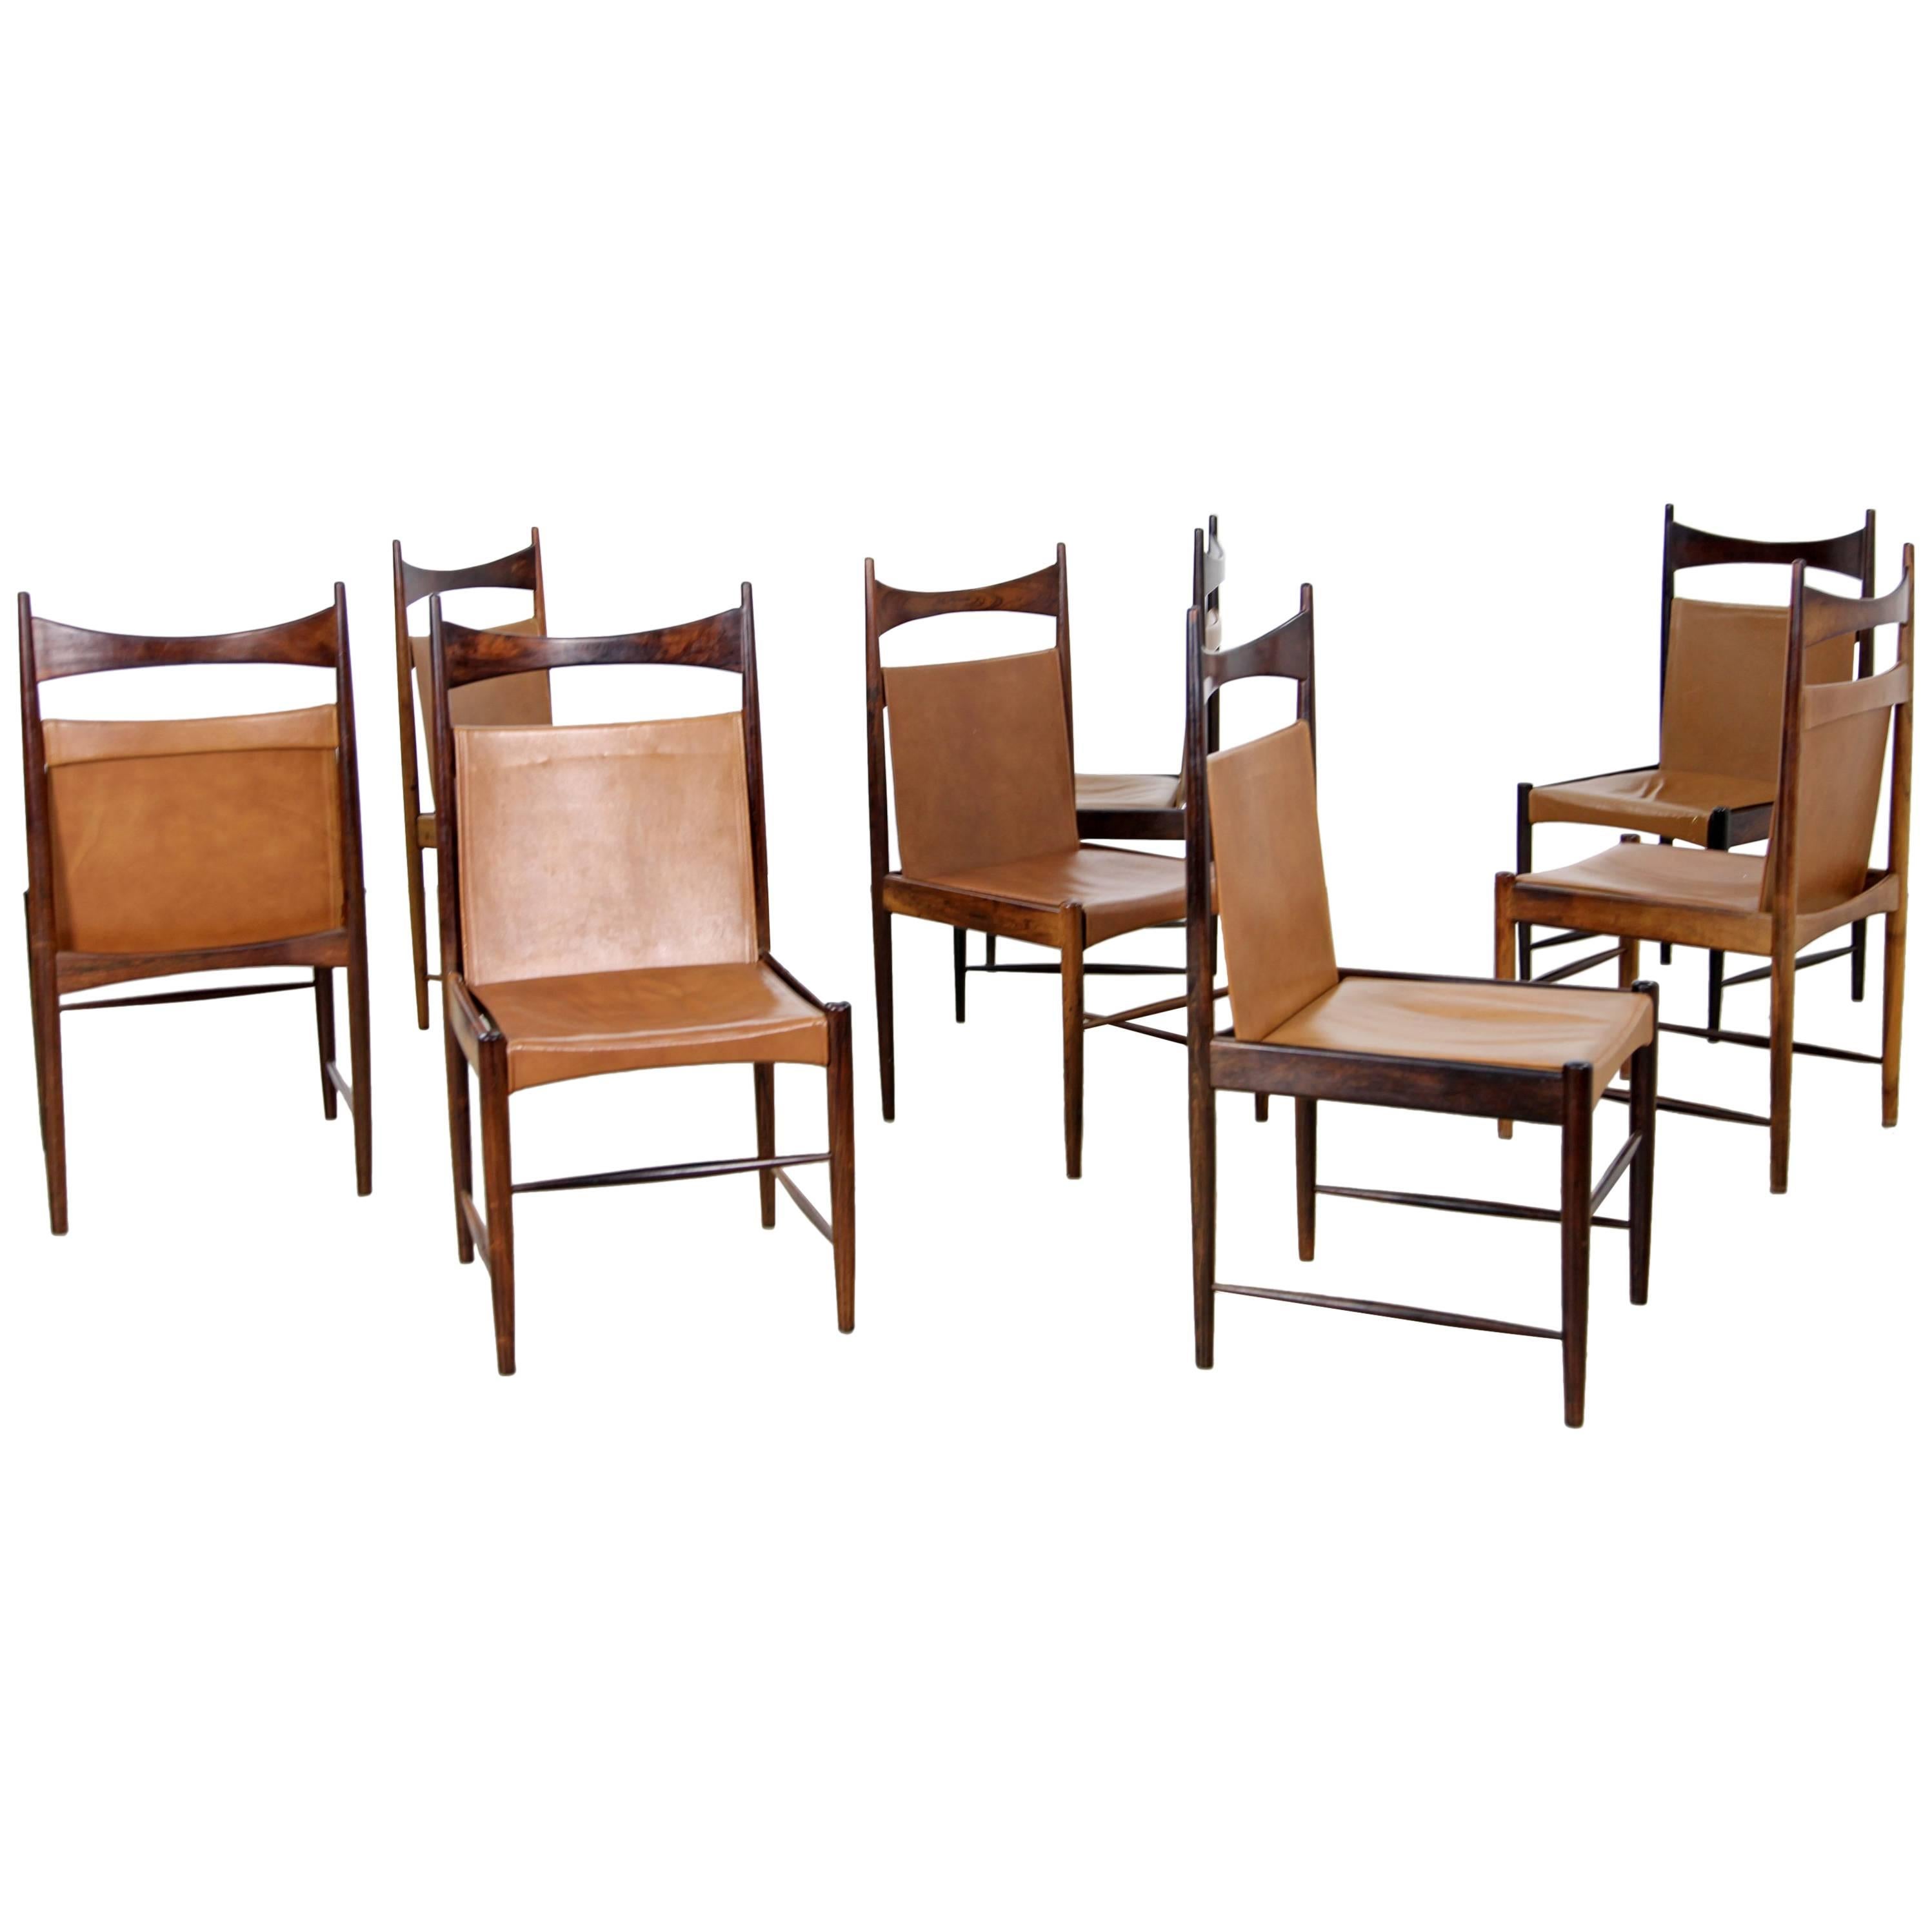 Set of Eight High Backed Chairs "Cantu" by Sergio Rodrigues